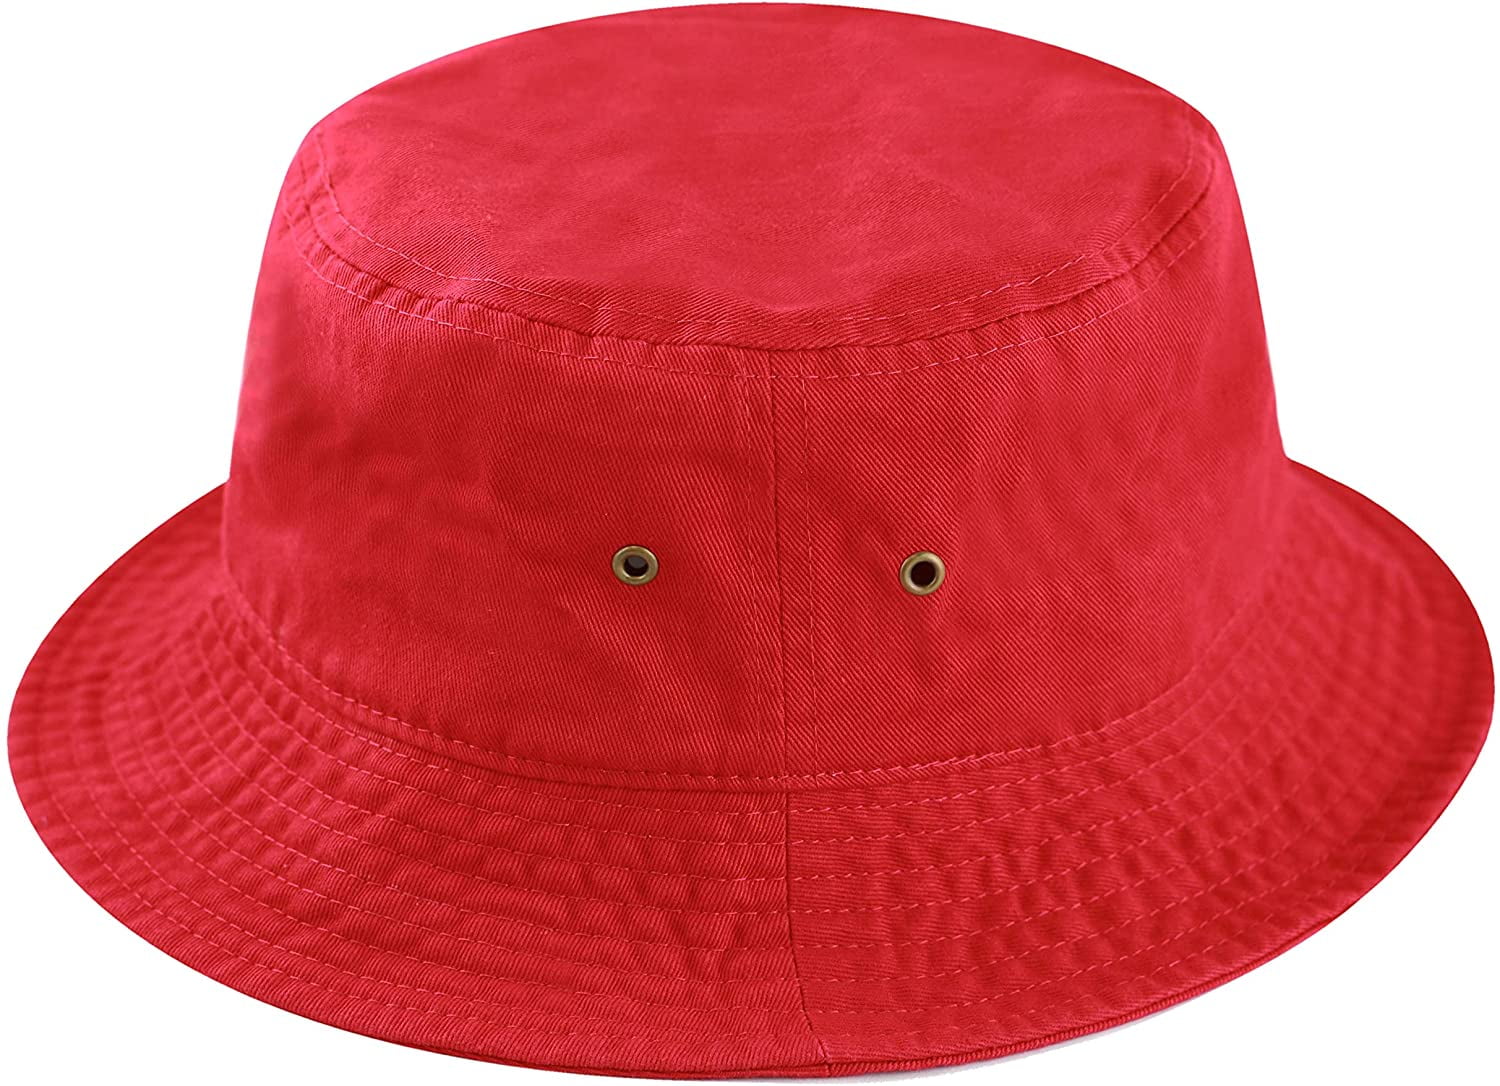 1pc Round Top Denim Bucket Hat Spring Summer Fashion Solid Color Foldable  Basin Hat Womens Hat, 90 Days Buyer Protection